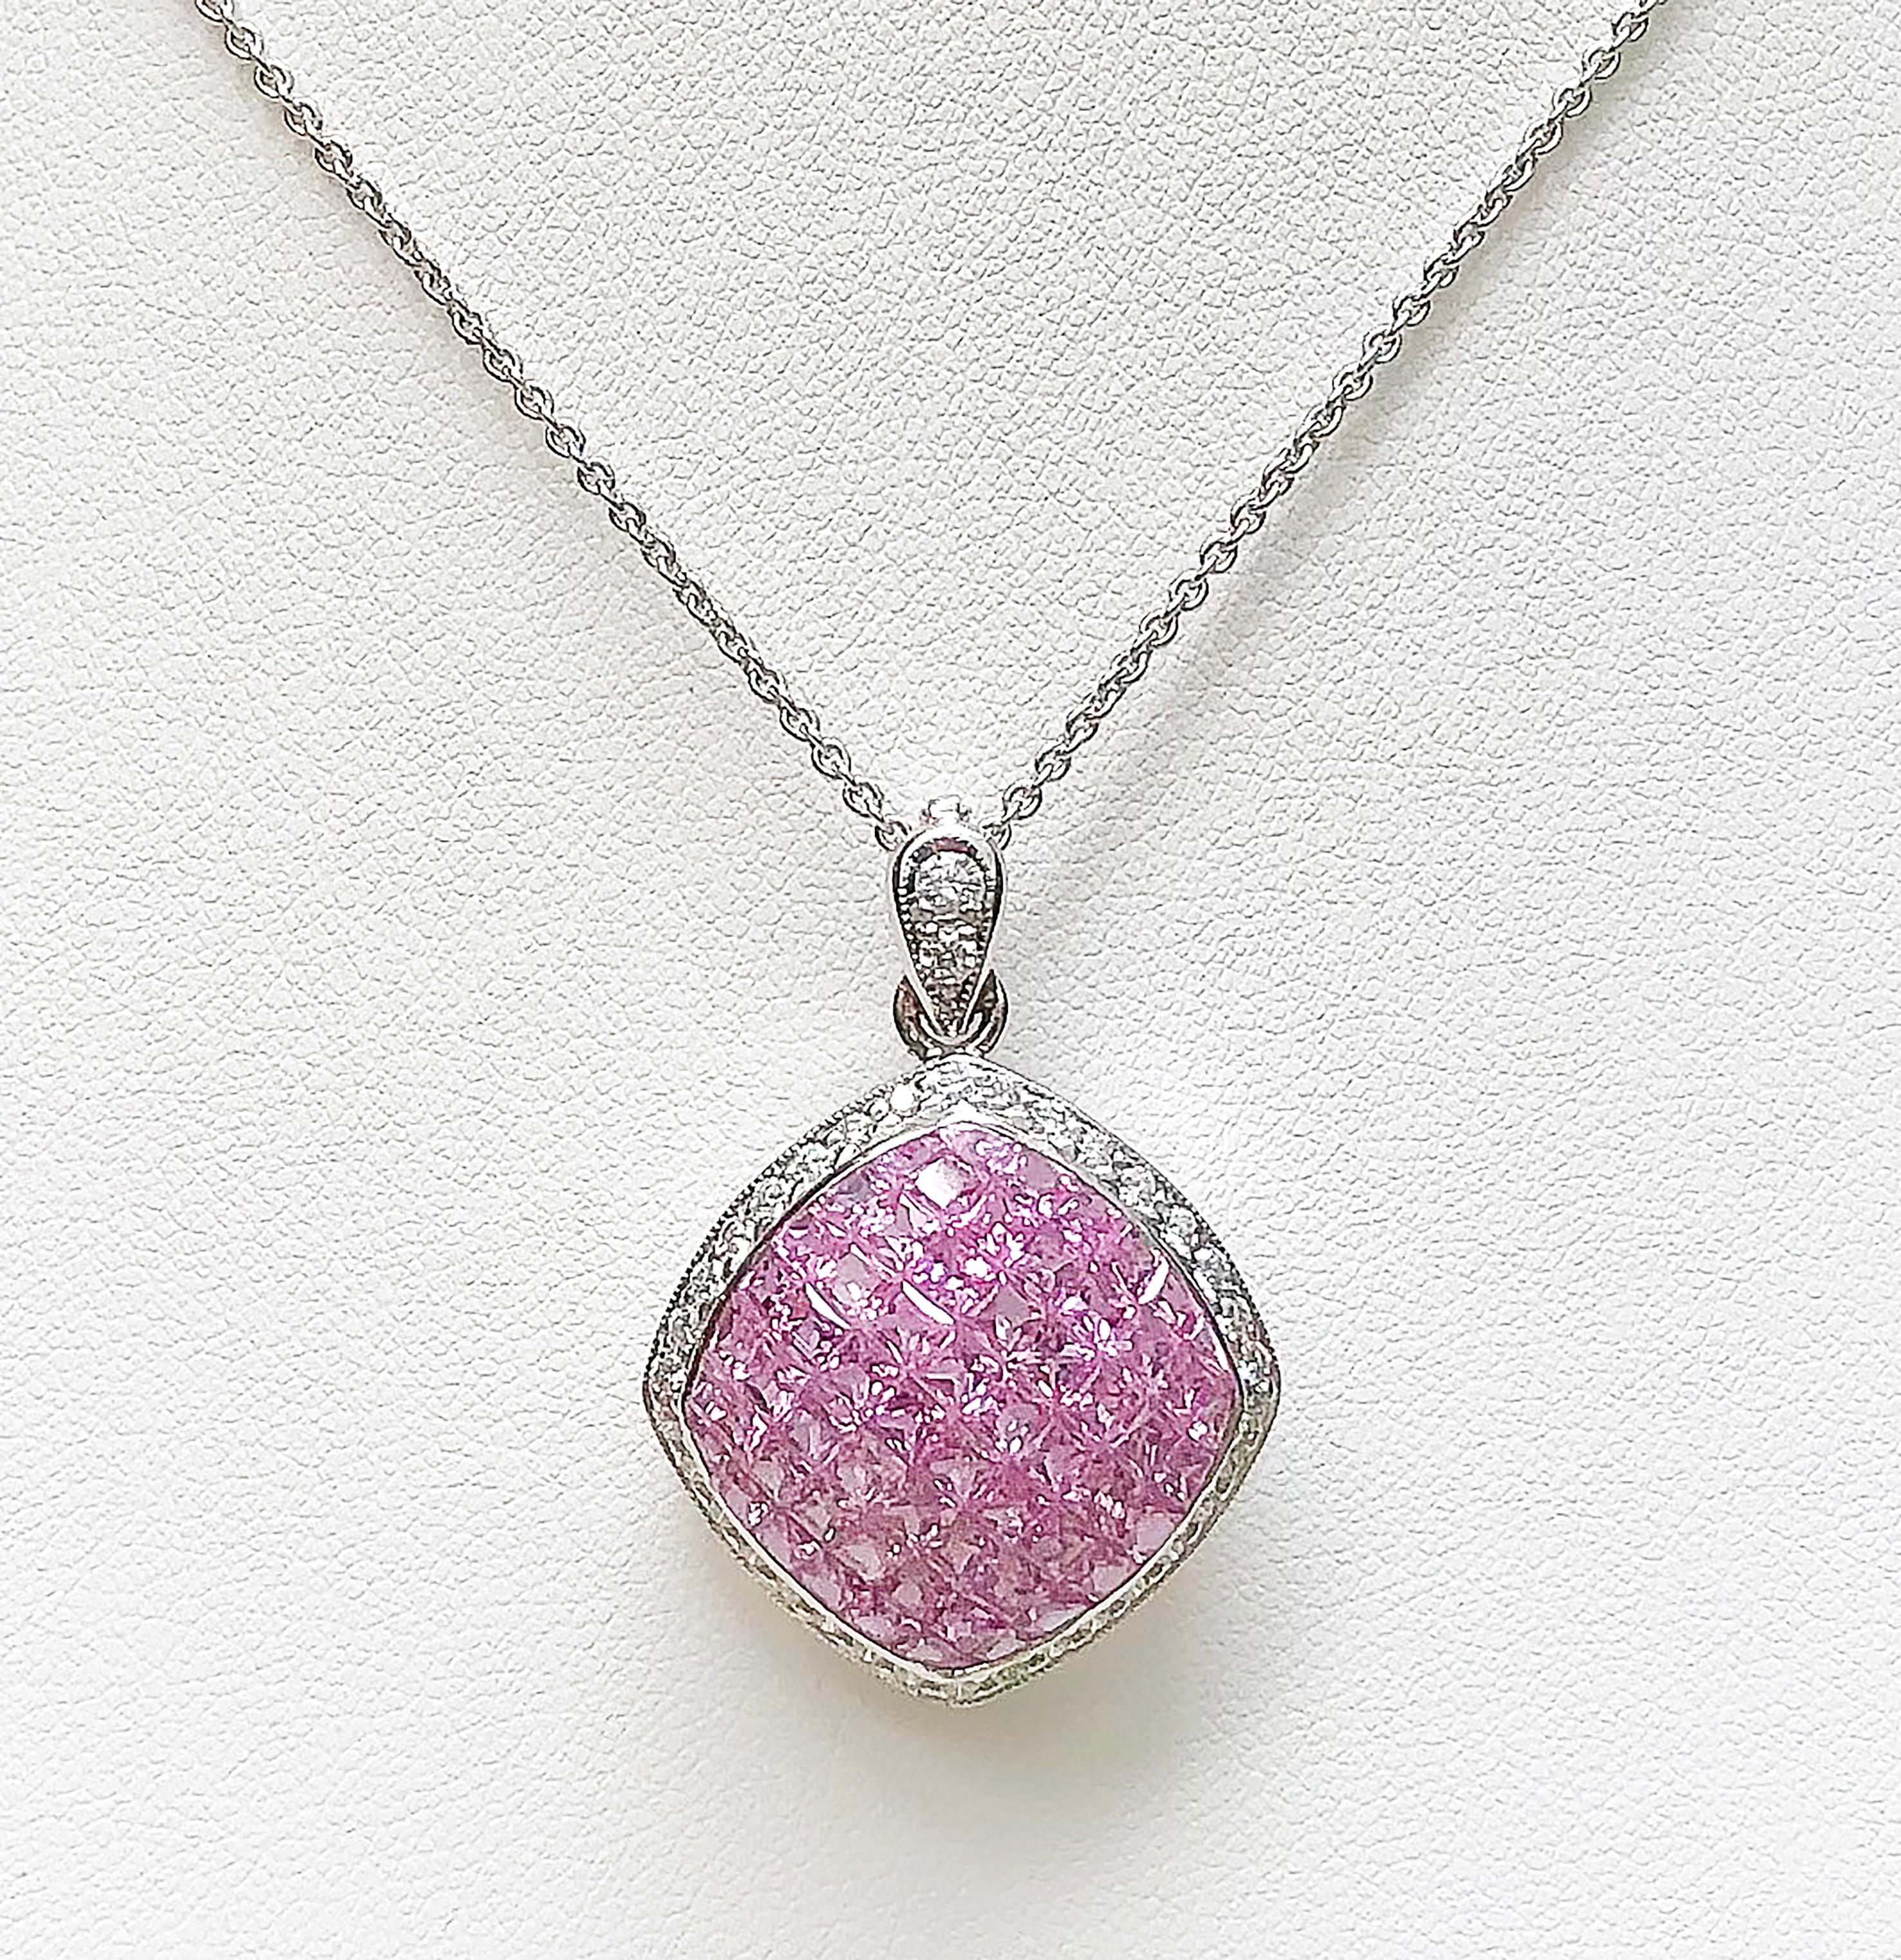 Pink Sapphire 10.91 carats with Diamond 0.66 carat Pendant set in 18 Karat White Gold Settings
(chain not included)

Width:  2.5 cm 
Length: 3.5 cm
Total Weight: 10.66 grams

